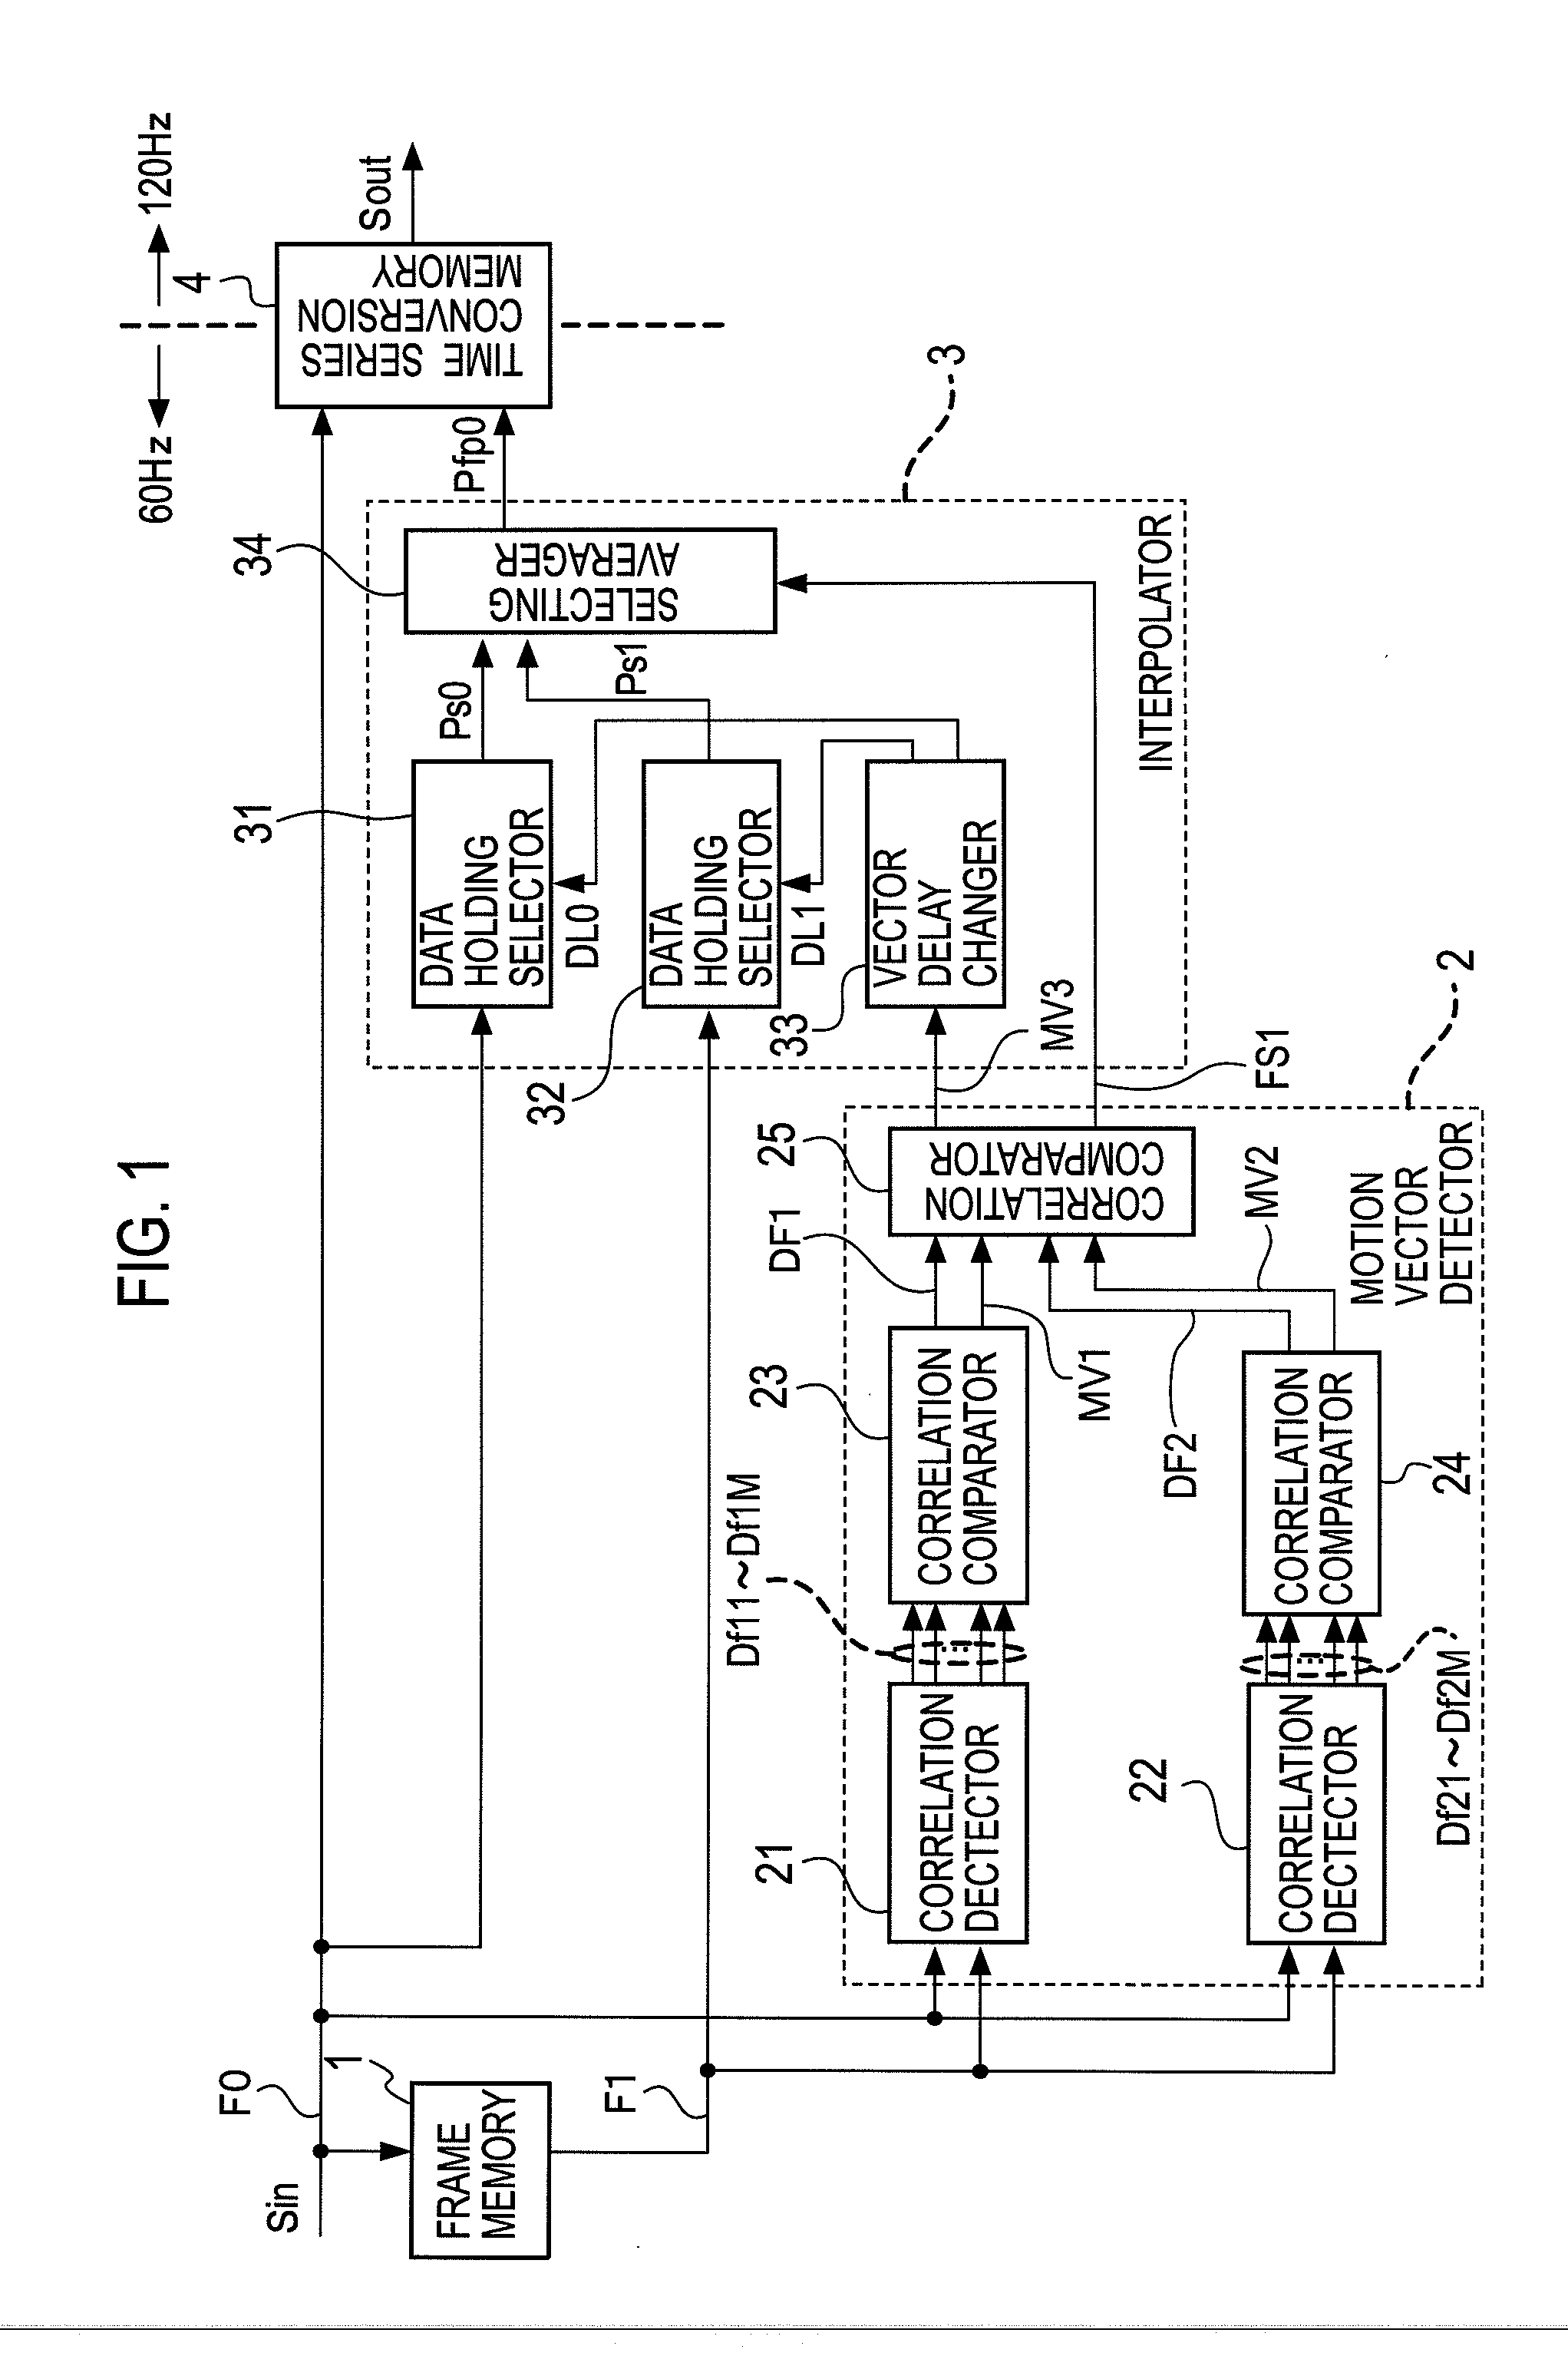 Frame rate conversion apparatus and method